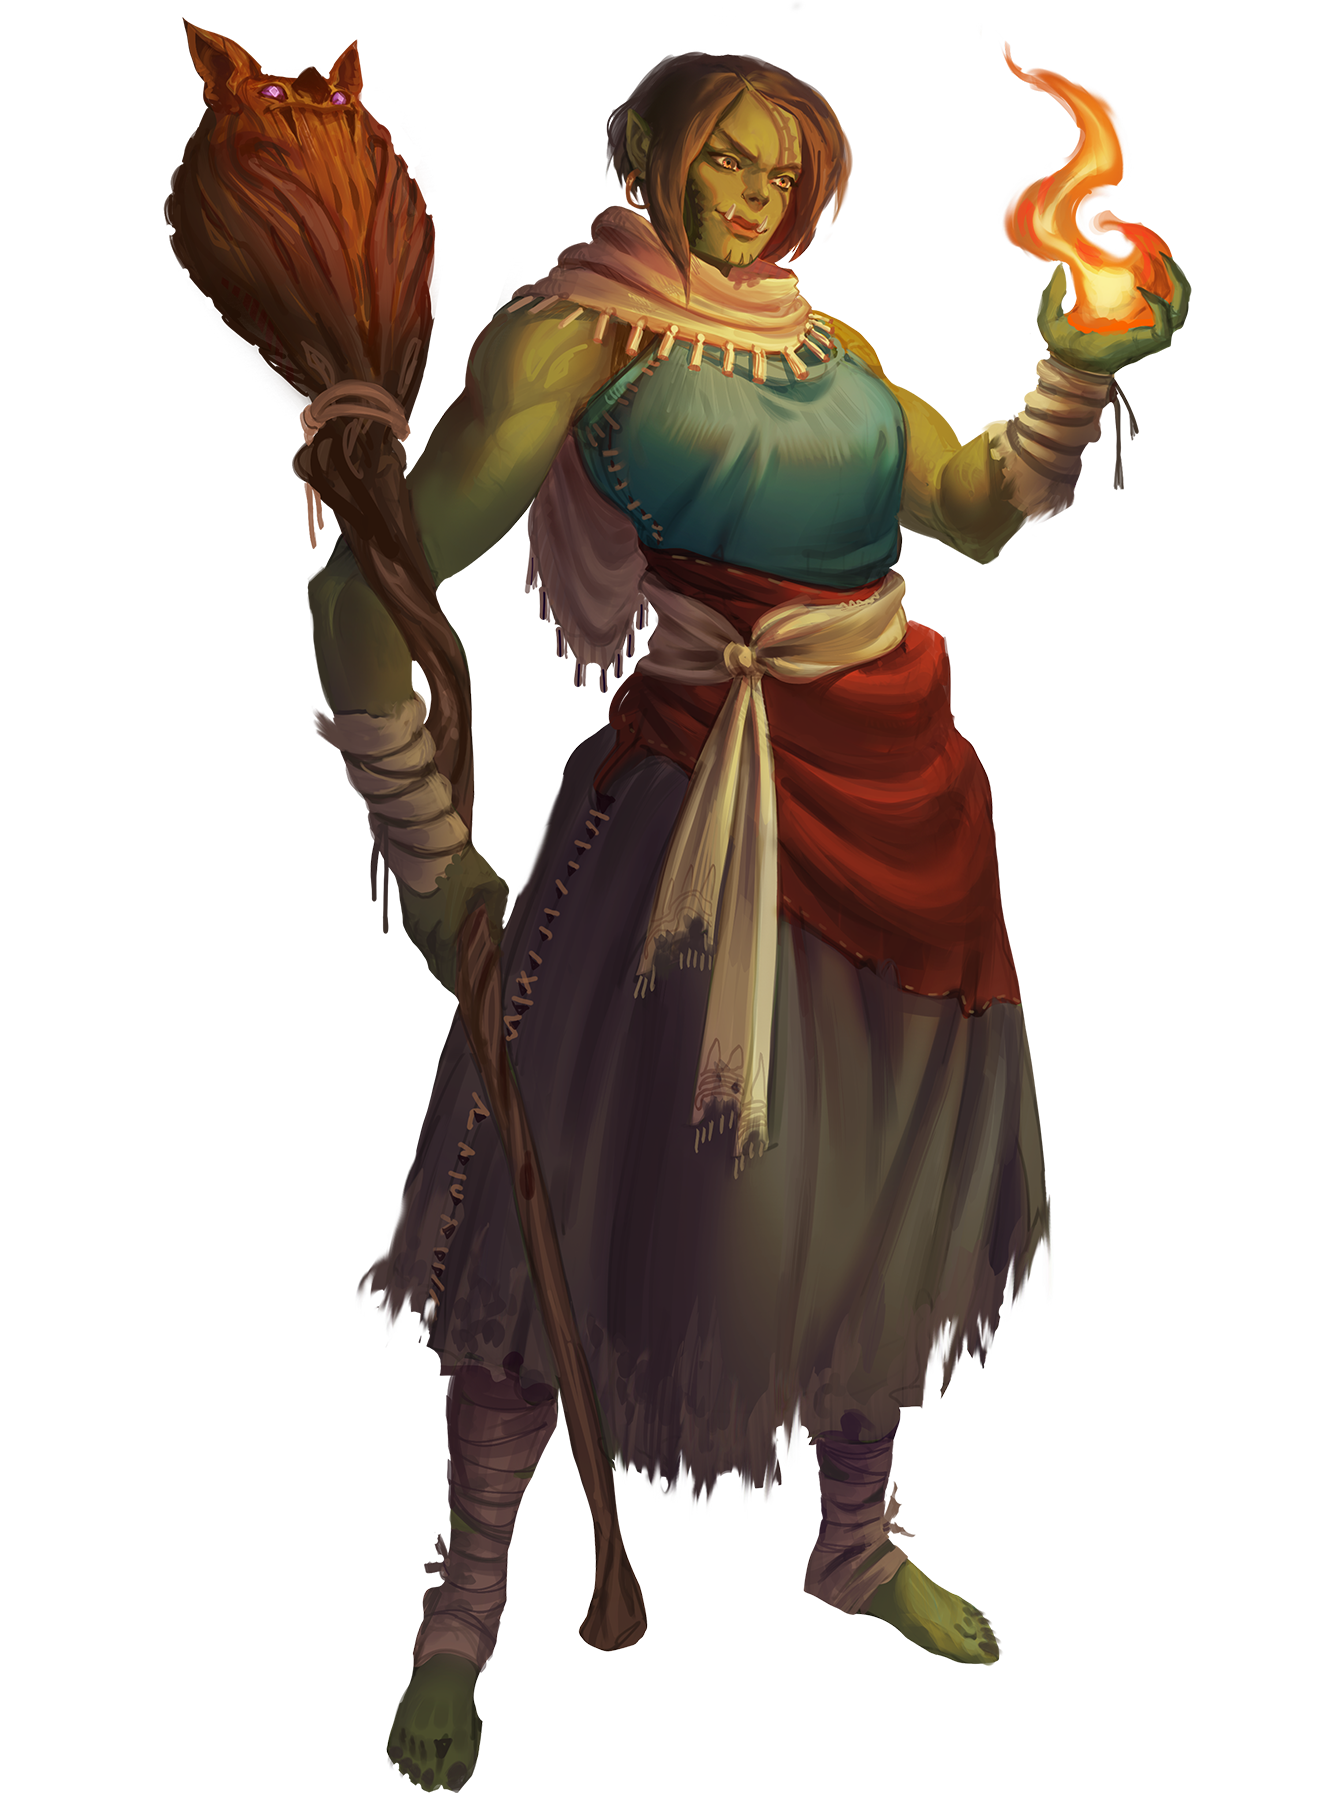 An Orc mage holding up fire in the palm of her hand